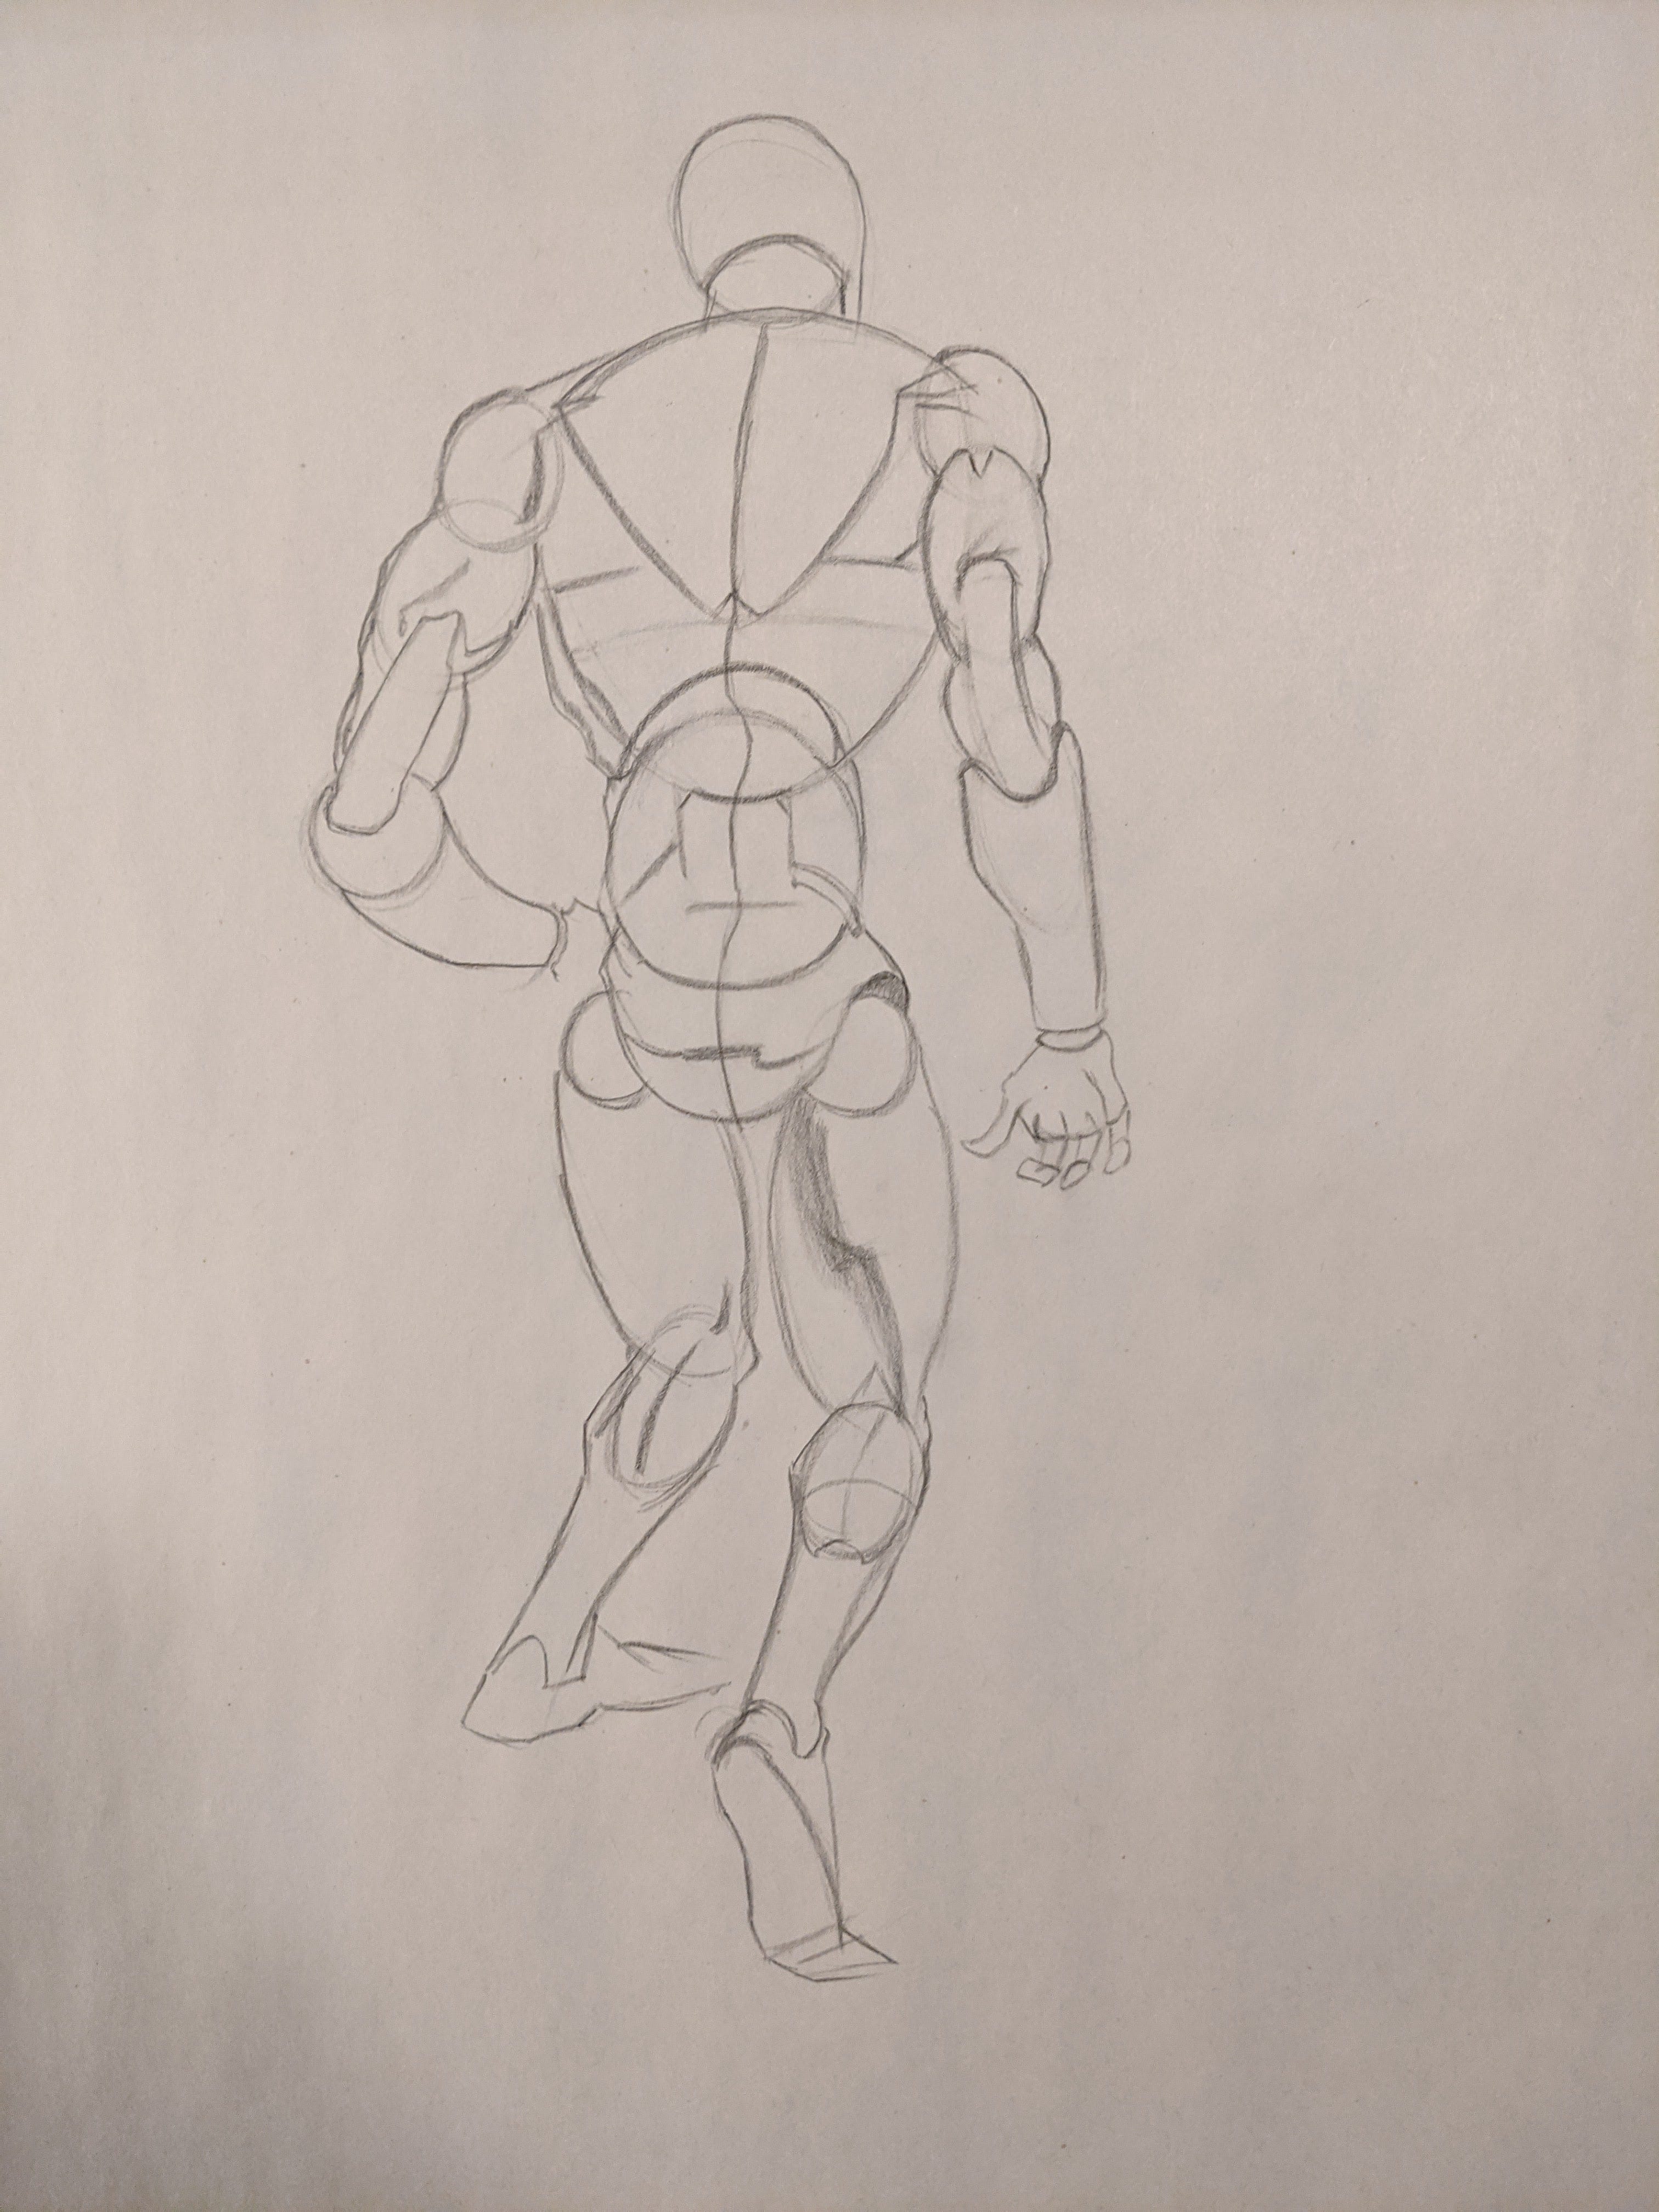 Drawing Mannequin for artists, Draw complicated perspectives with correct  proportions of the human body! NEW redesigned versions with extra moves and  features! Last chance to save BIG